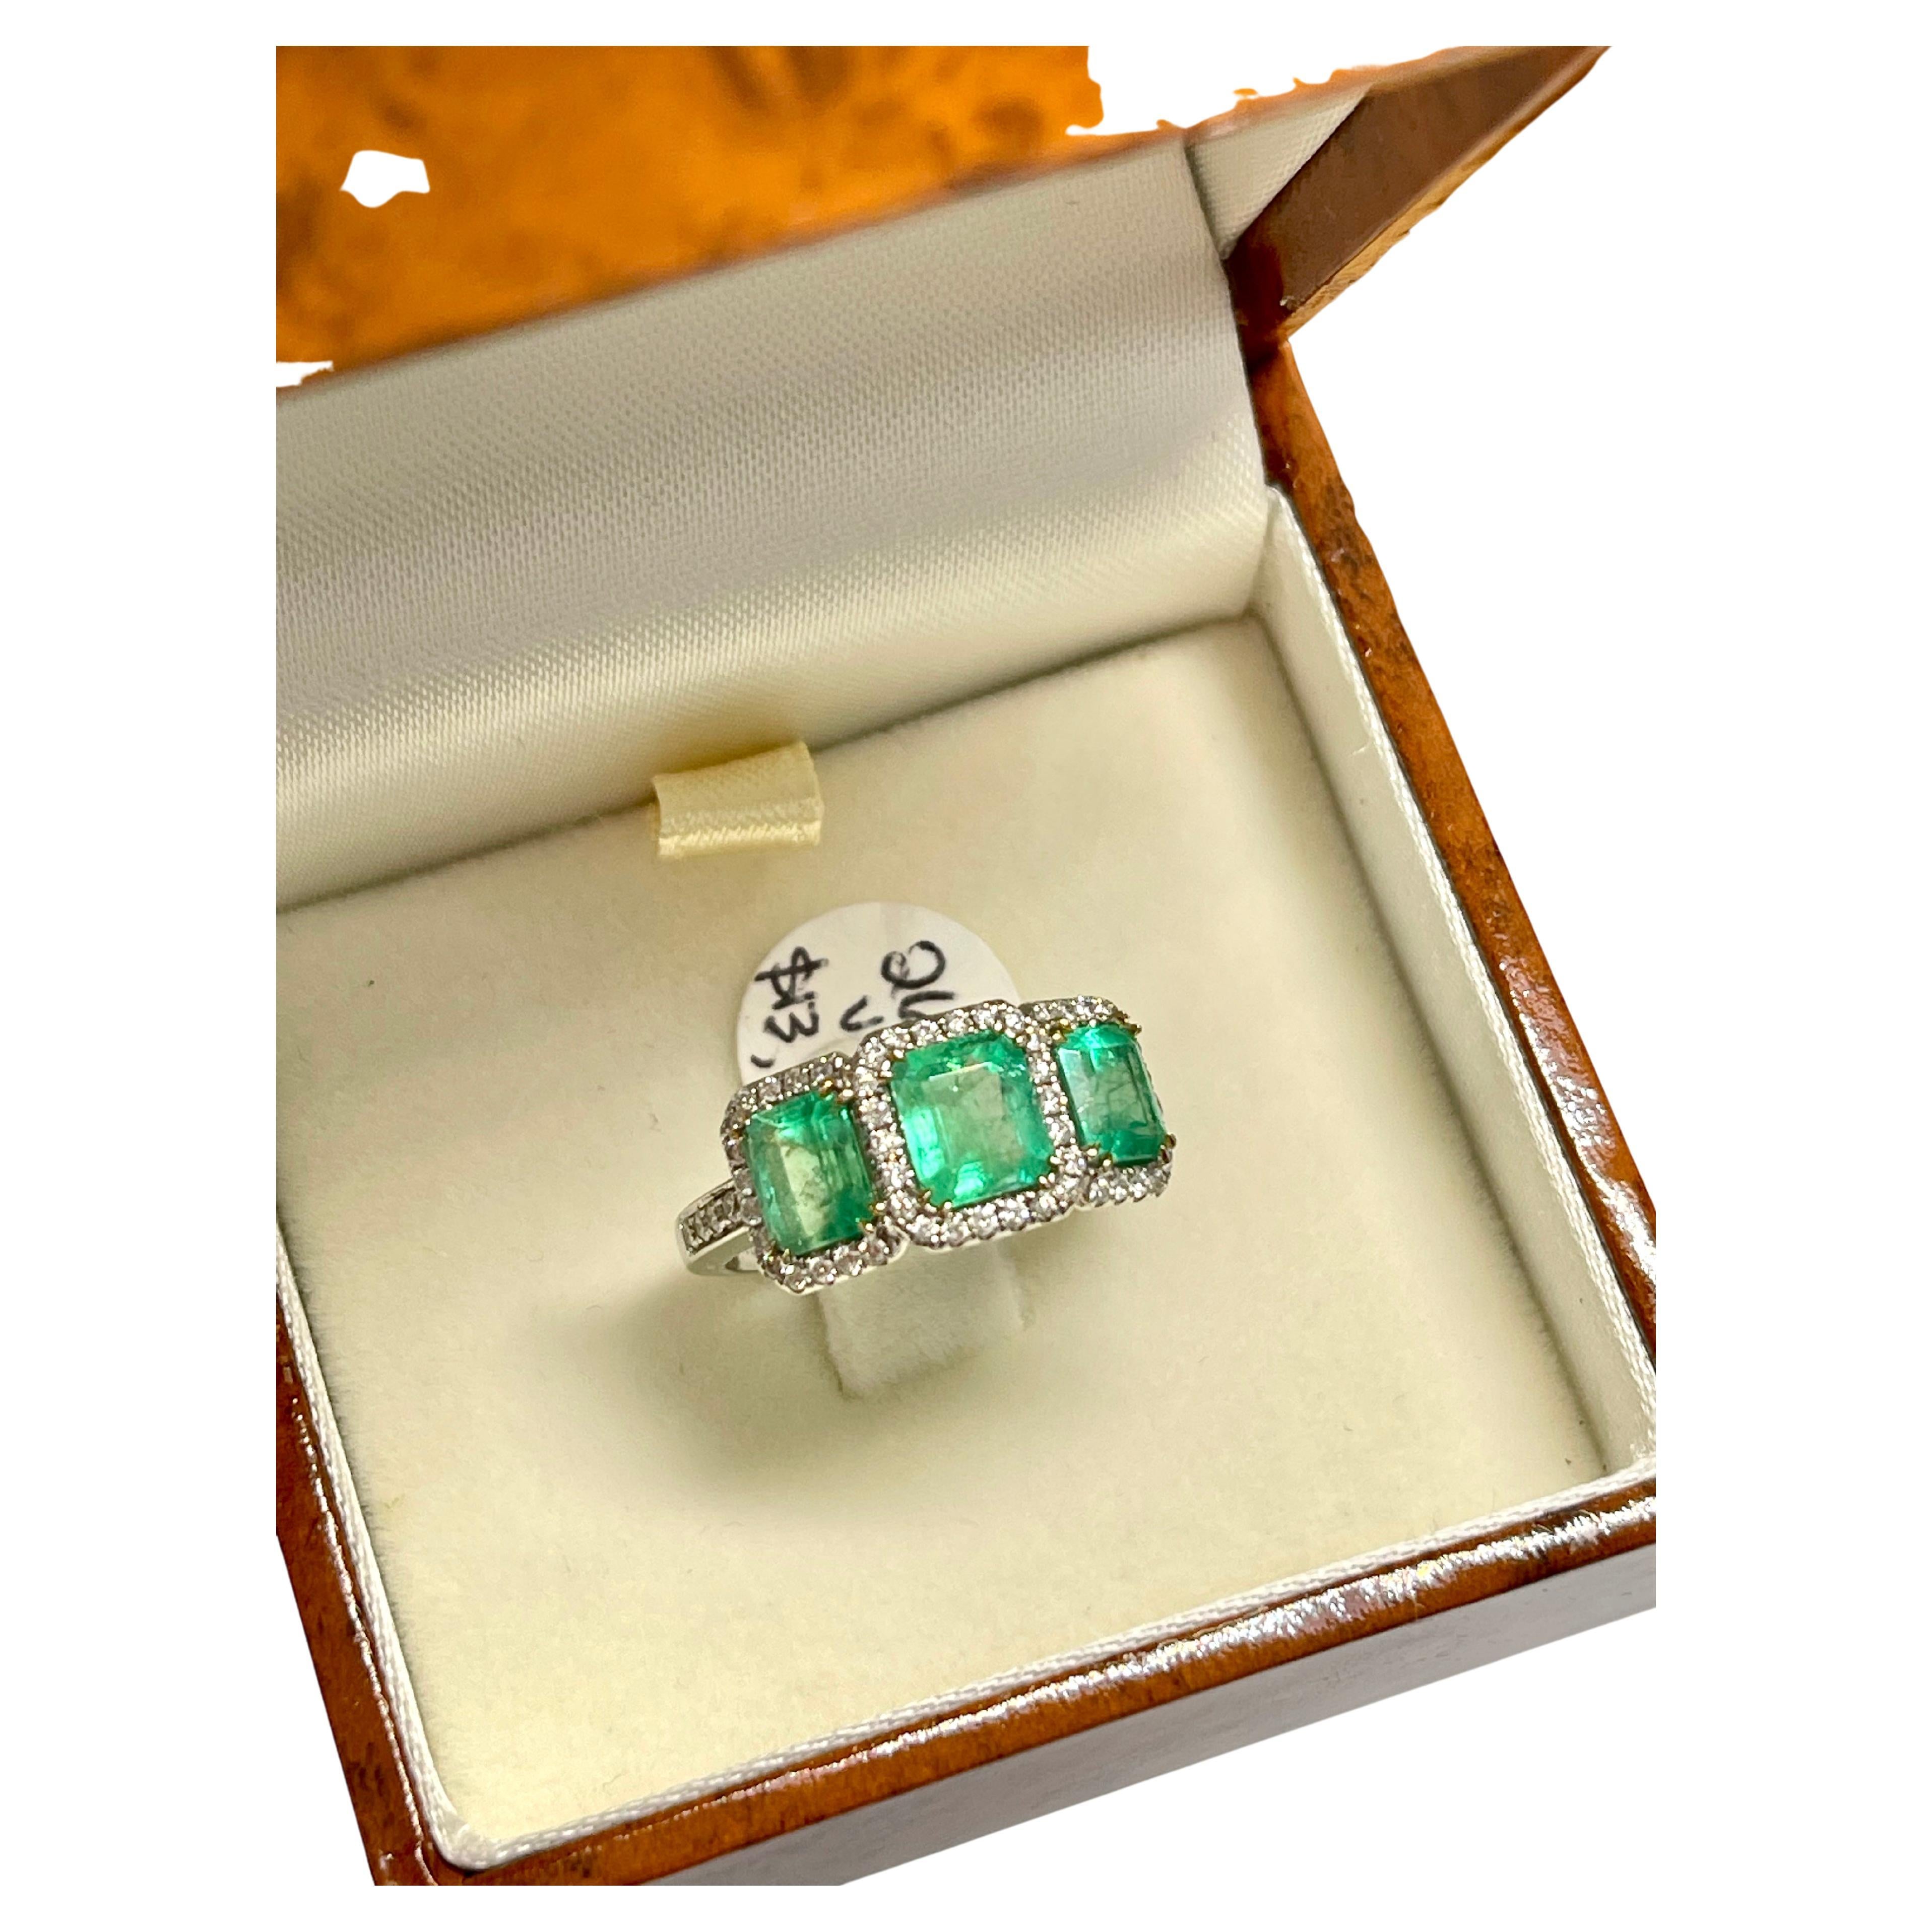 Natural Vivid 2 Carat Colombian Emerald Diamond Ring 18ct White Gold Valuation In New Condition For Sale In Mona Vale, NSW